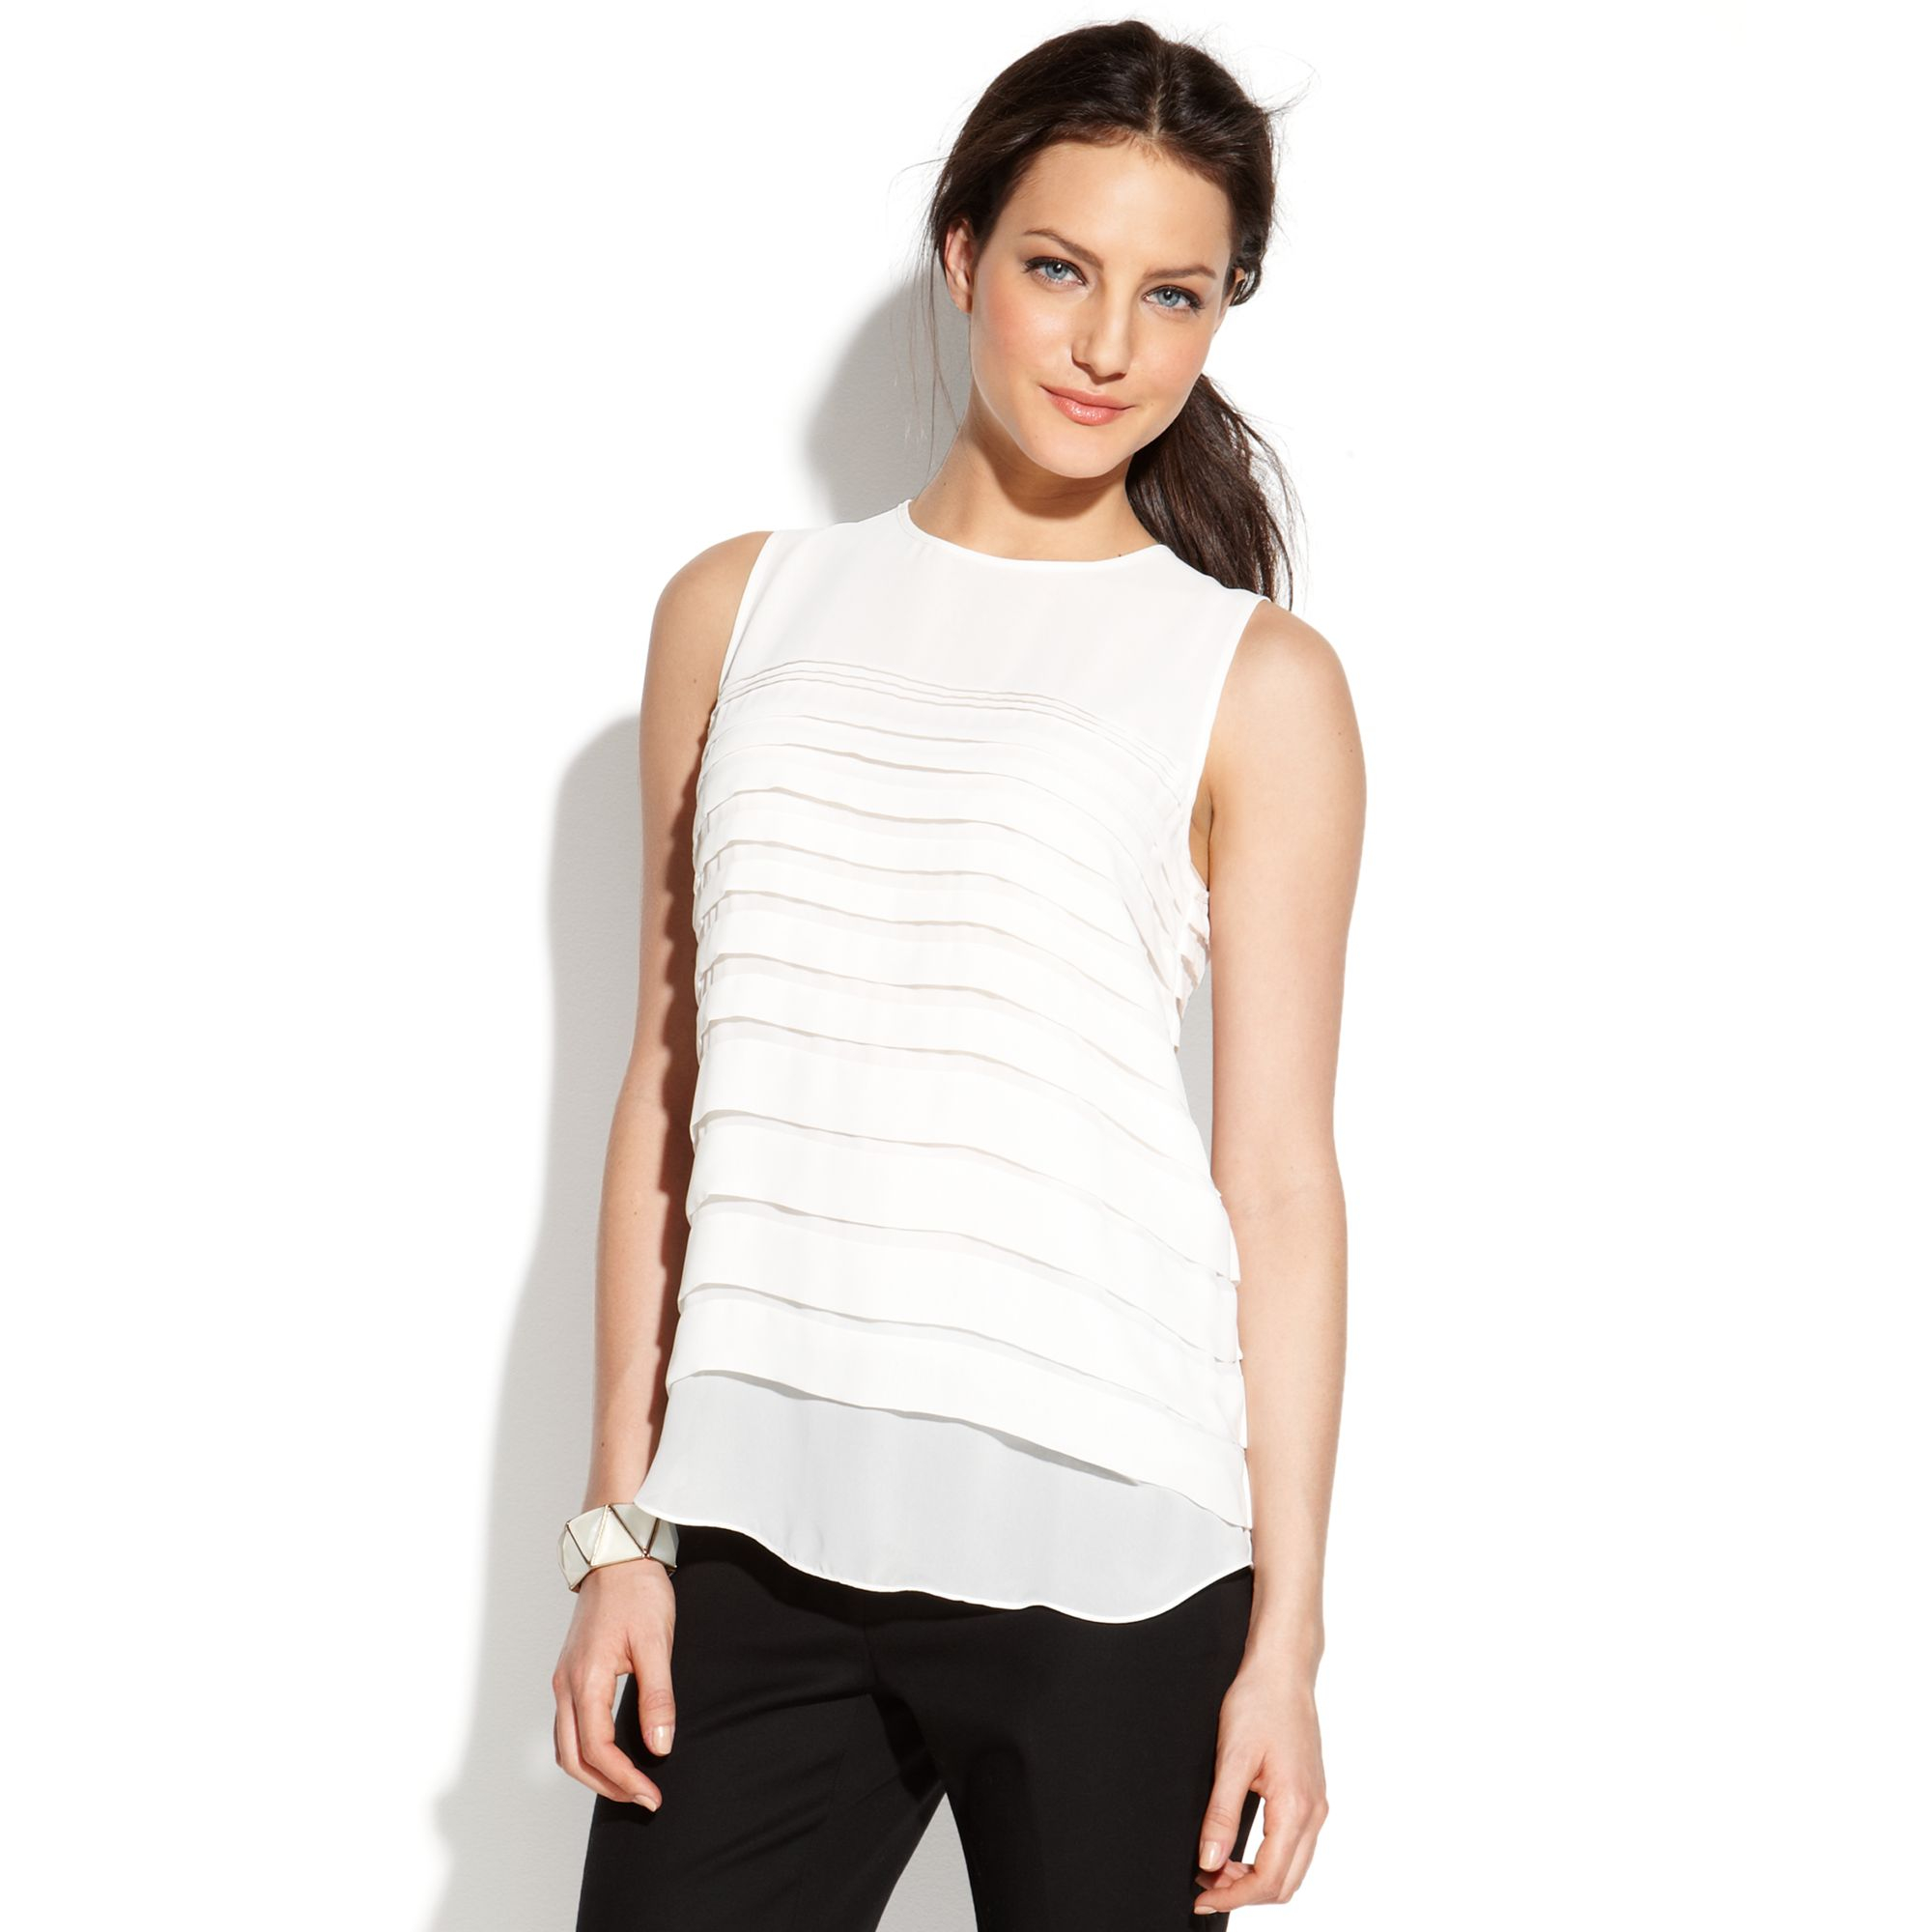 Lyst - Vince Camuto Sleeveless Tiered Blouse in White